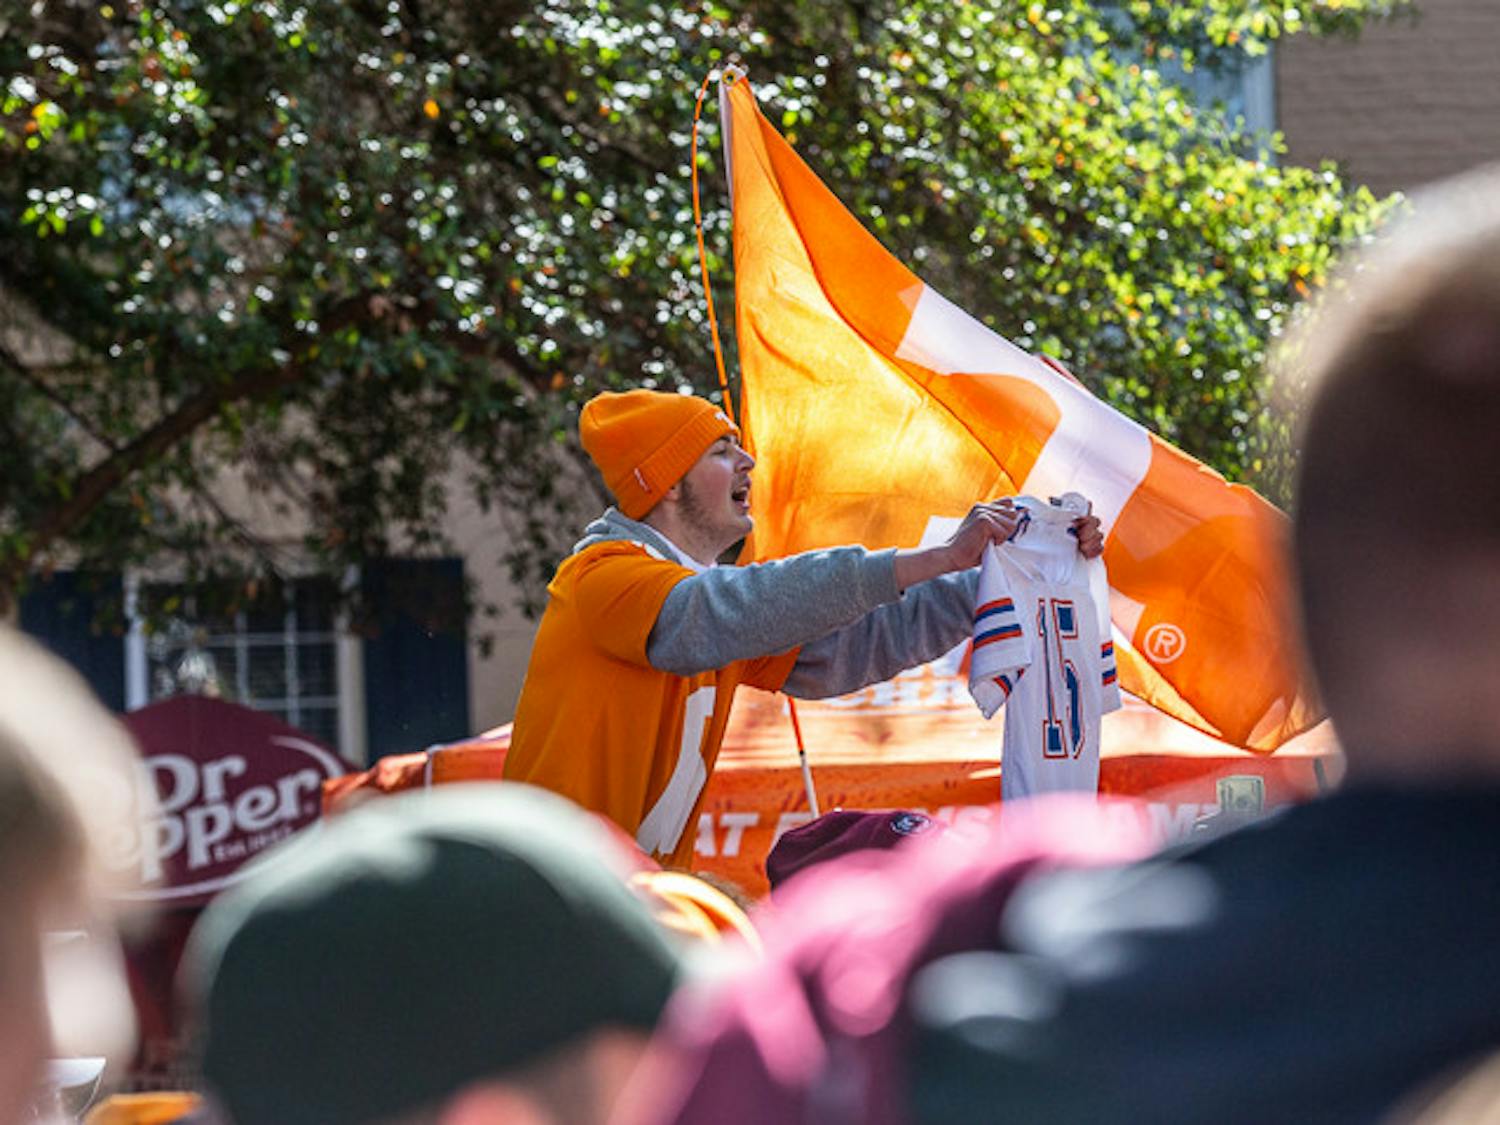 A Tennessee fan calls for Tim Tebow to sign his Florida jersey during the SEC Nation morning show on Nov. 19, 2022 on USC's Horseshoe. Fans from across South Carolina and Tennessee came to attend the event.